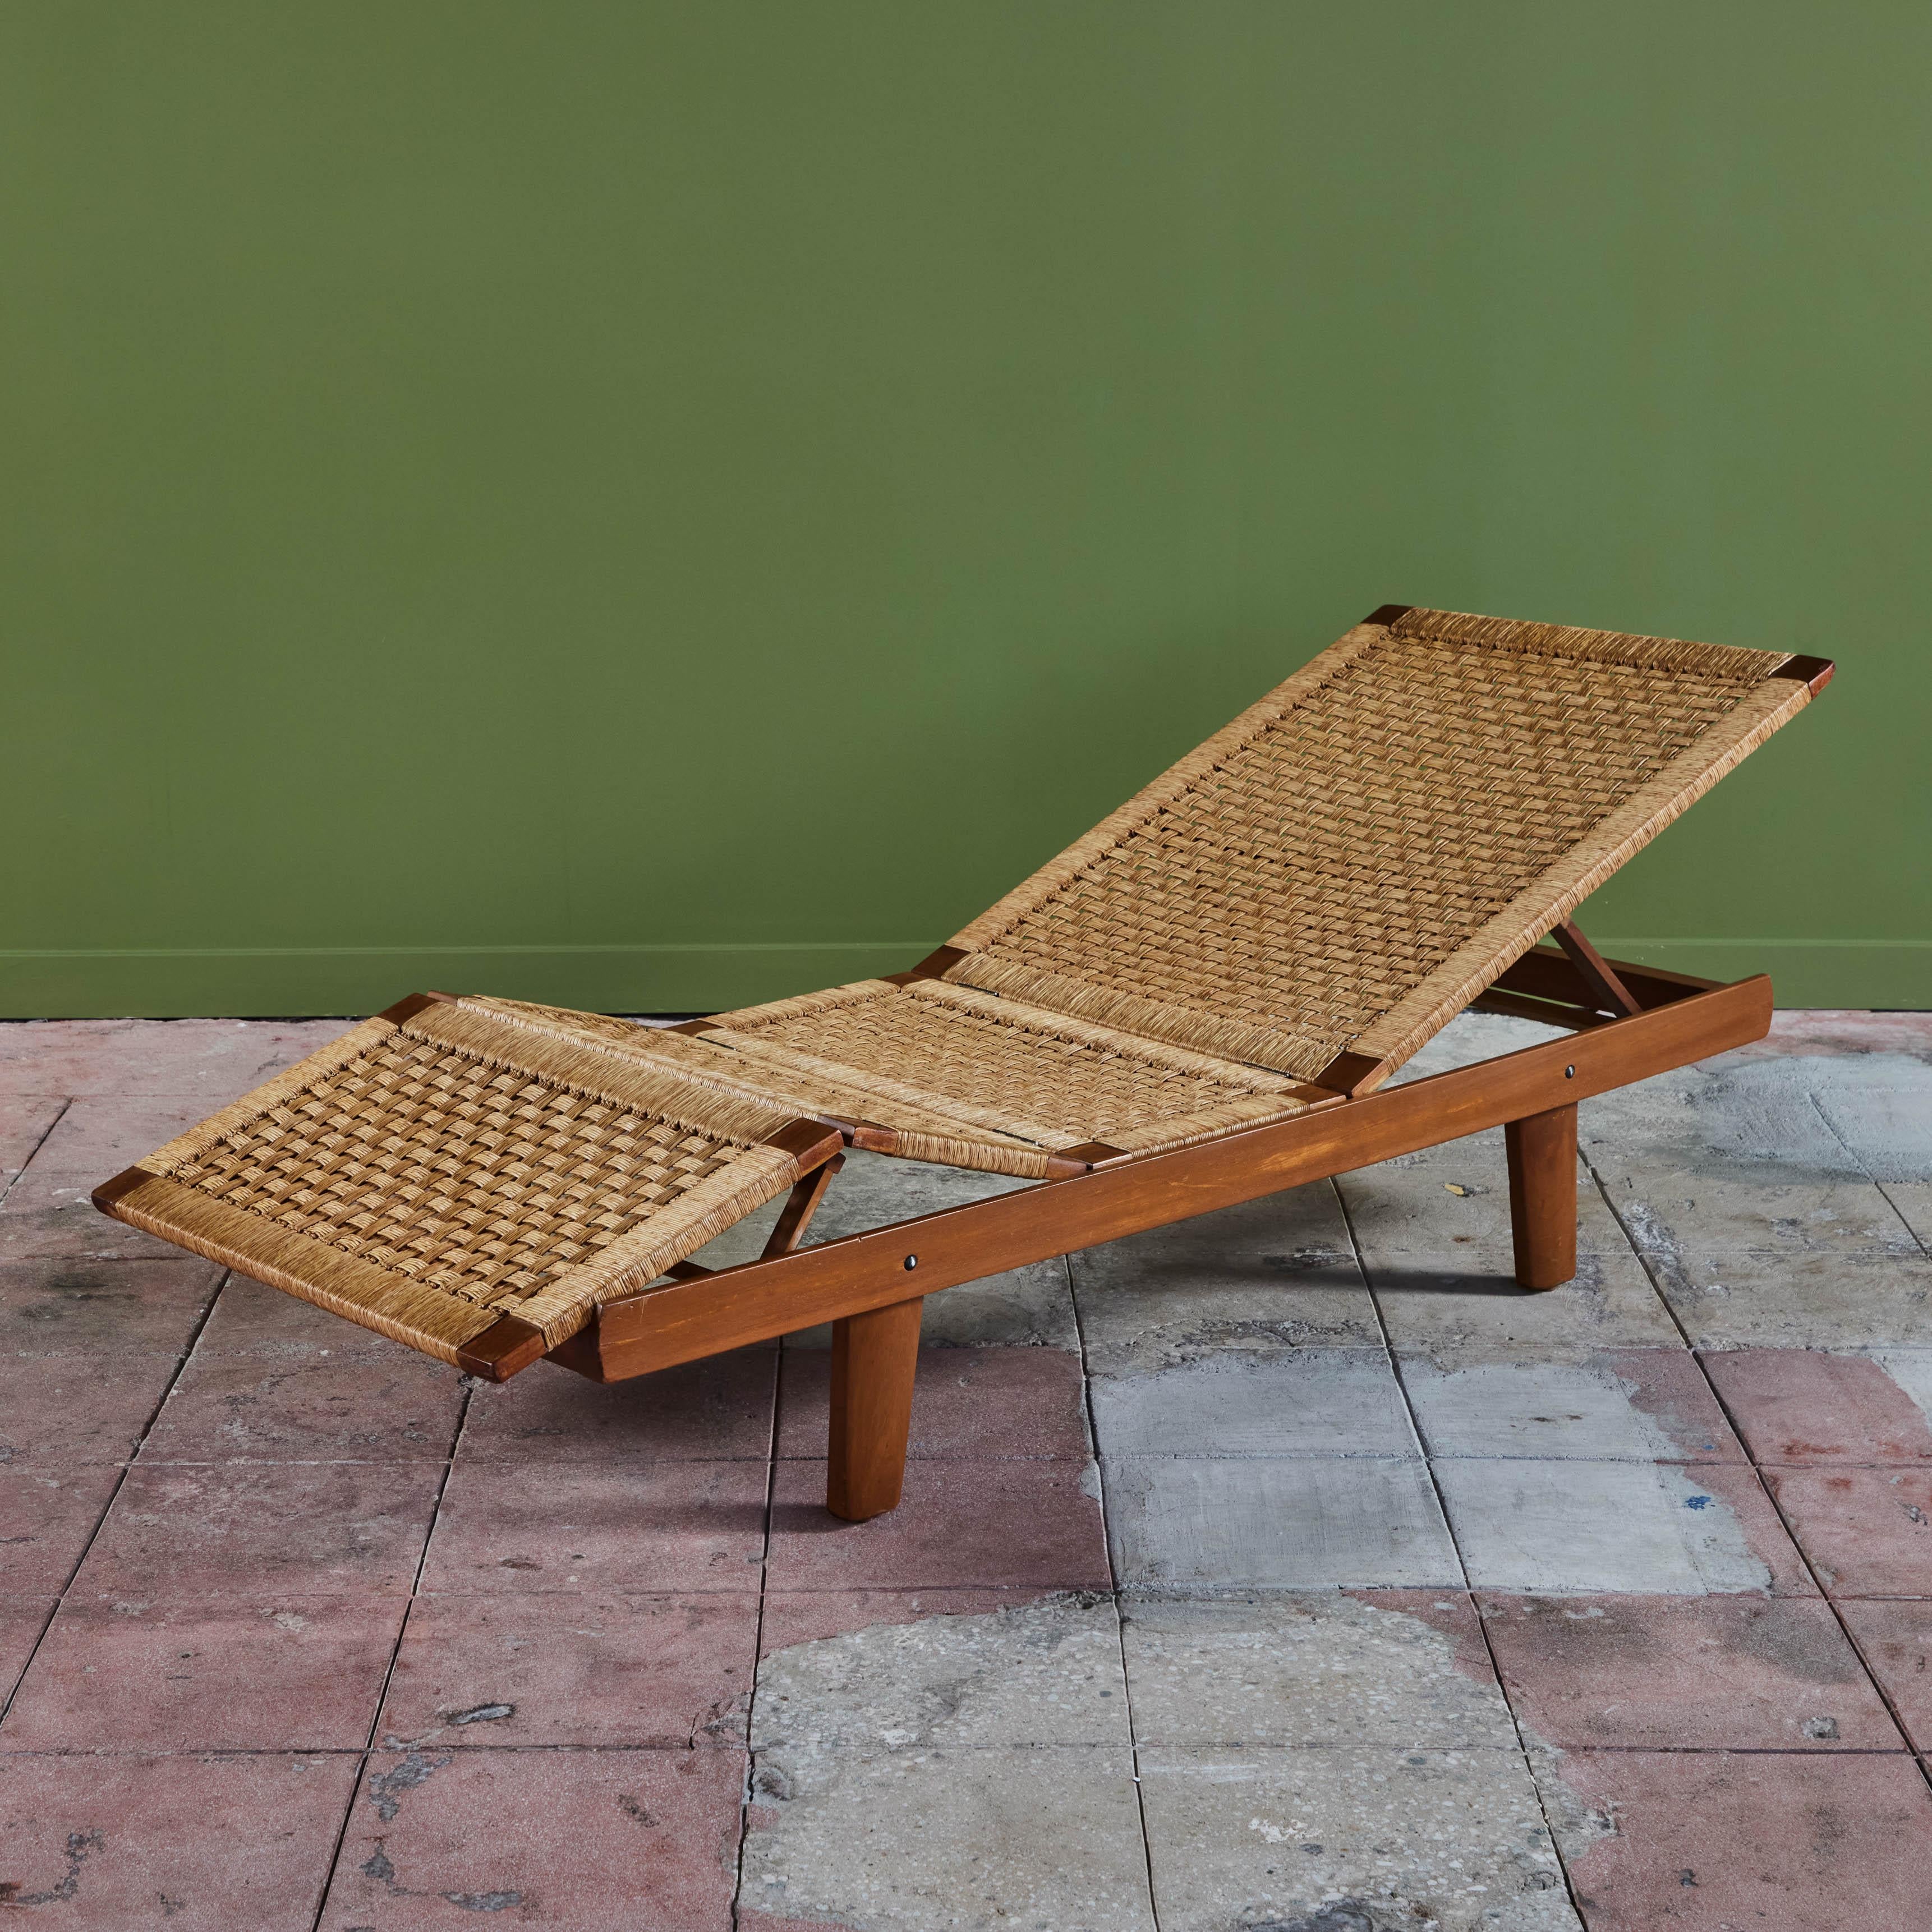 Bauhaus trained, Mexico City based designer, Michael Van Beuren created highly functional modern pieces inspired by Mexican vernacular styles and materials. This example, c.1950s Mexico has a pine frame with a woven rattan seat. The piece lays flat